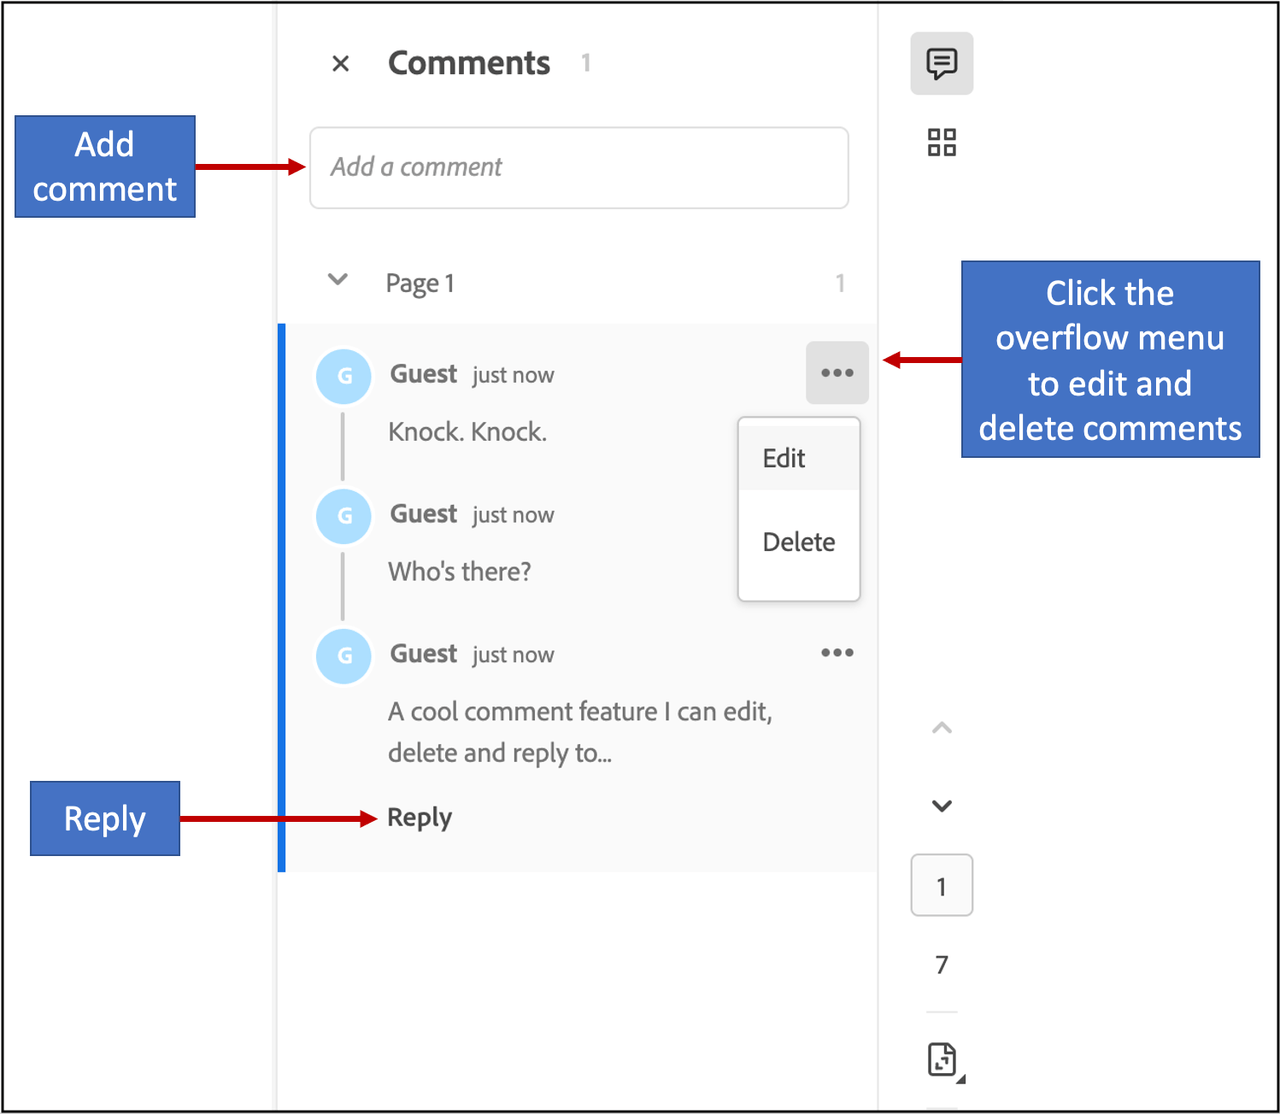 Comment Pane with features to add comments, reply to a comment, add a note with comment and delete comments